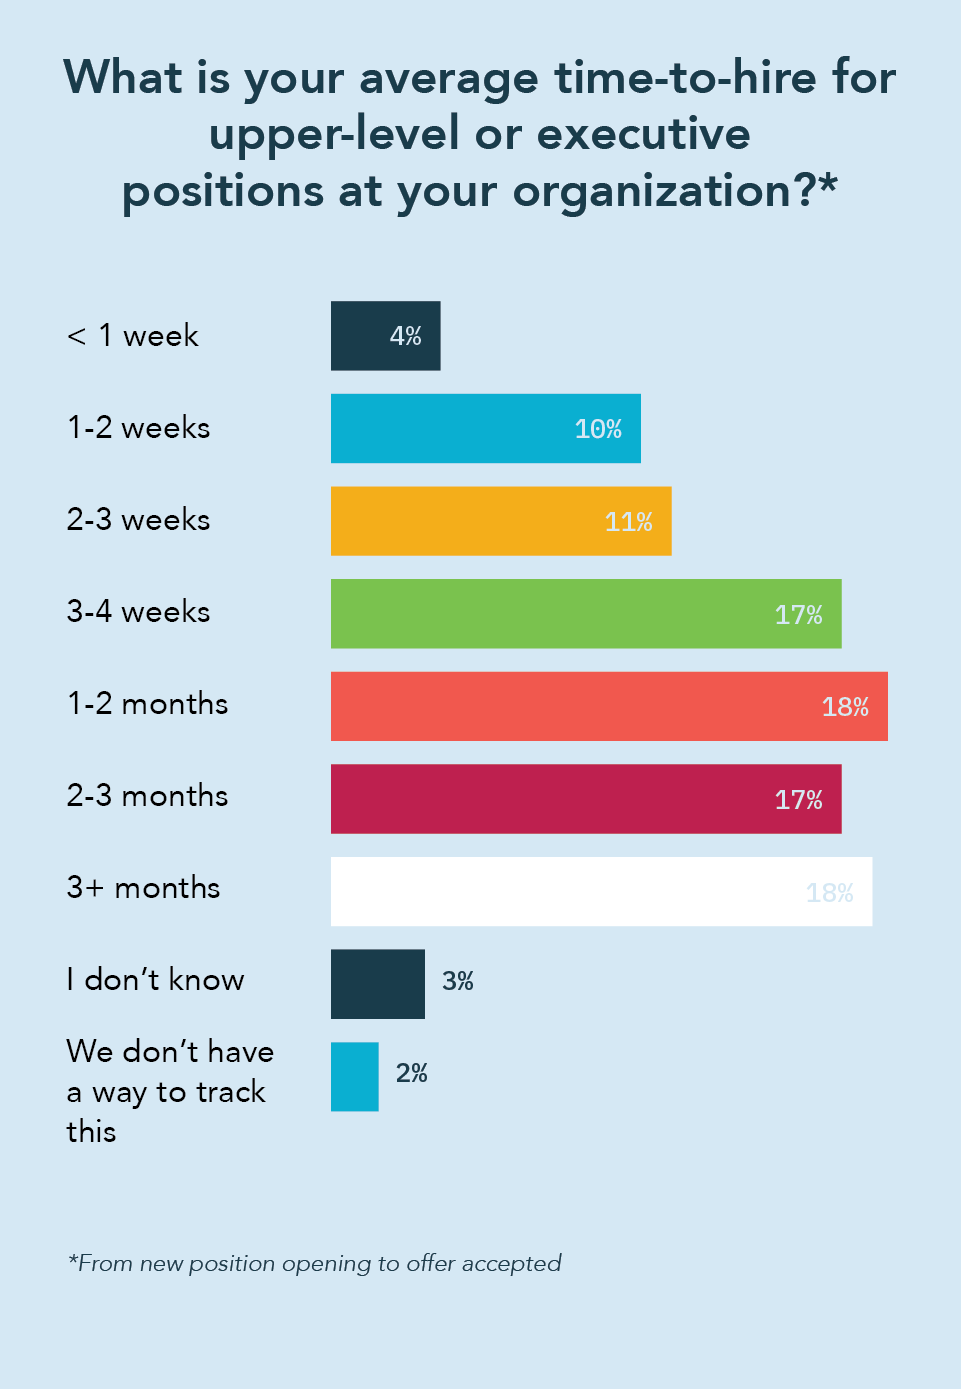 When asked what is the average time-to-hire for upper-level or executive positions at their organization, 18% said either 1-2 months or over 3 months while 17% said 3-4 weeks or 2-3 months.